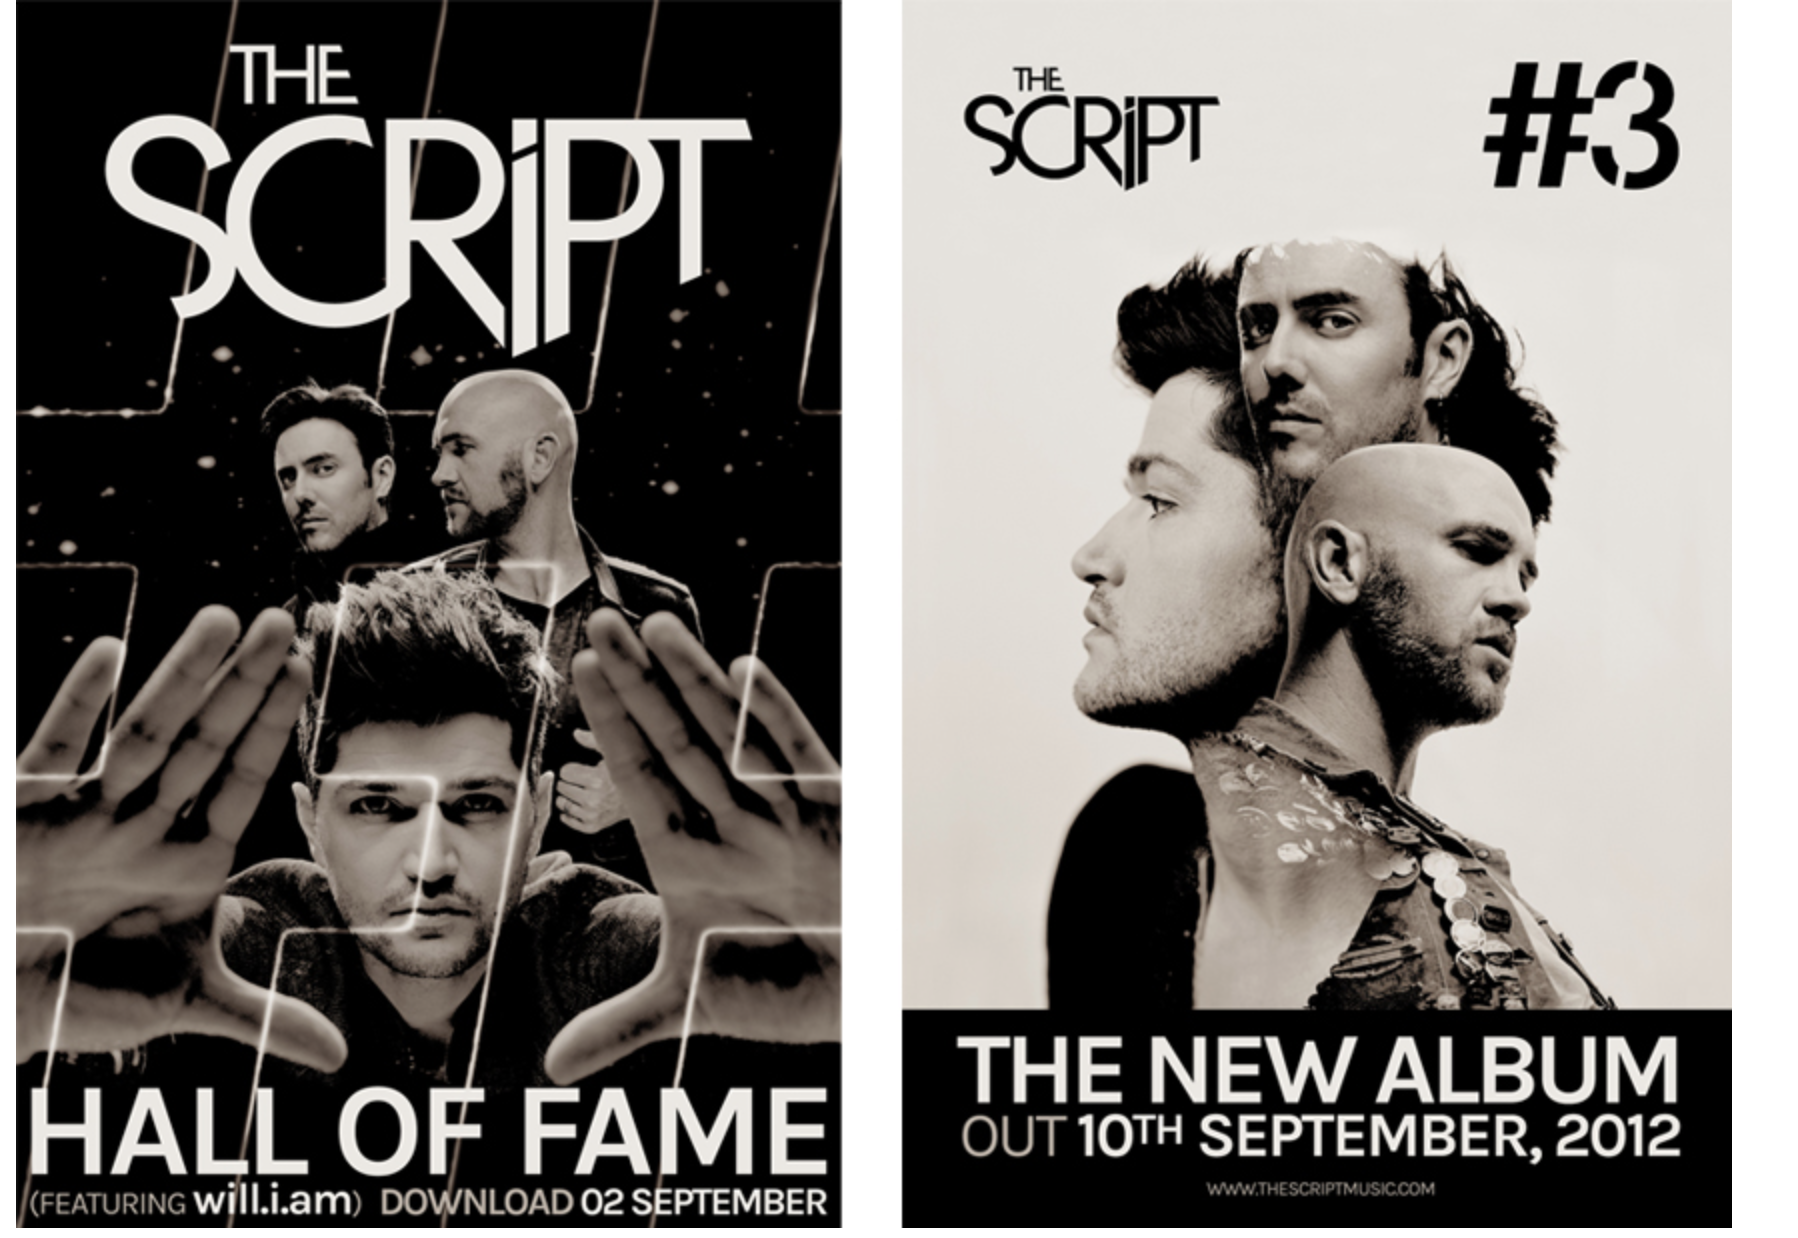 The script - Hall of Fame обложка. Hall of Fame the script. Hall of Fame the script feat. Will.i.am. Песня Hall of Fame. The script if you could